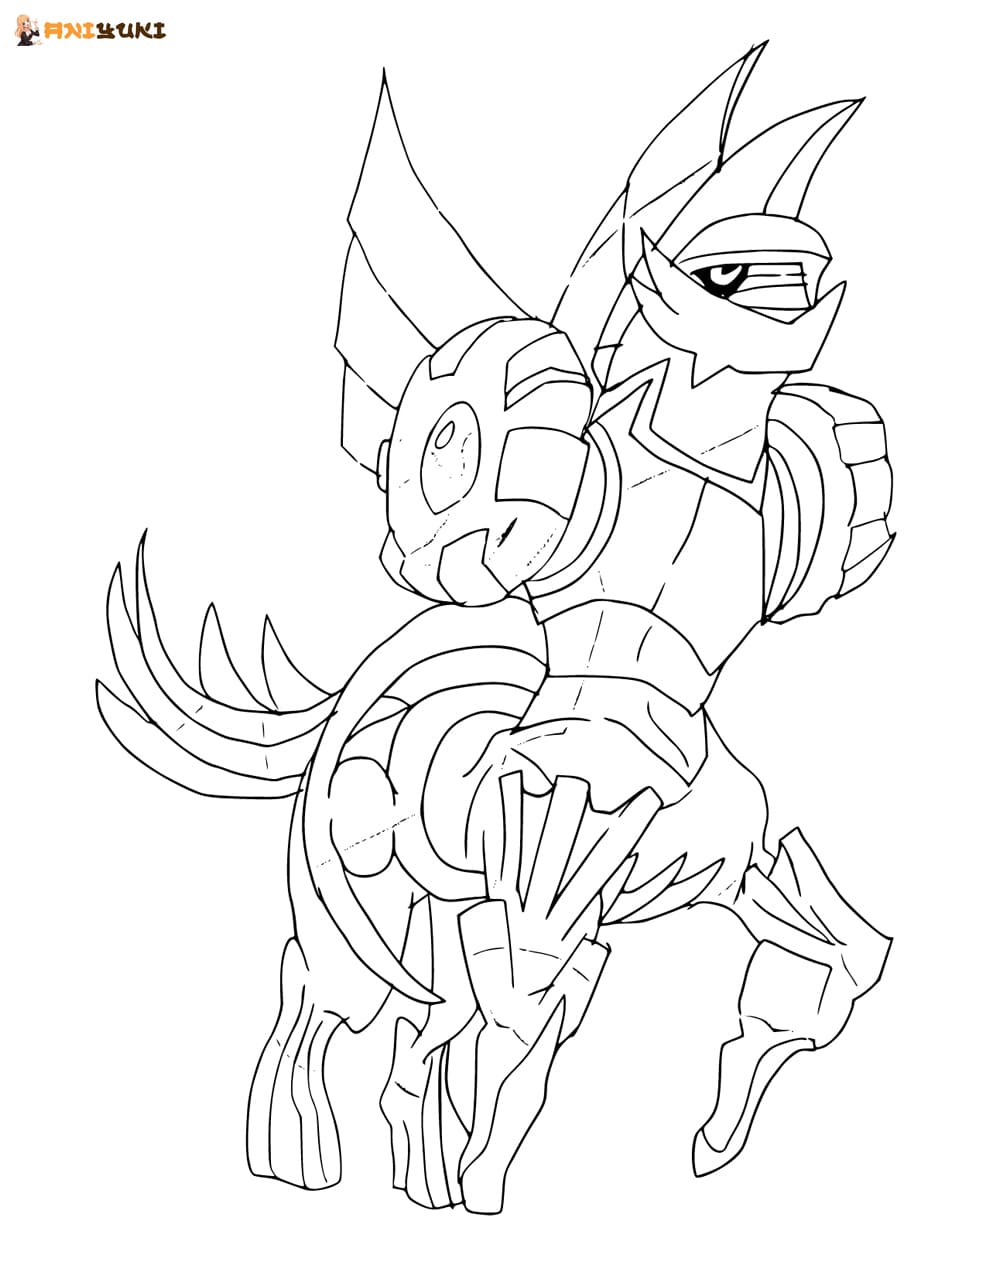 Palkia coloring pages